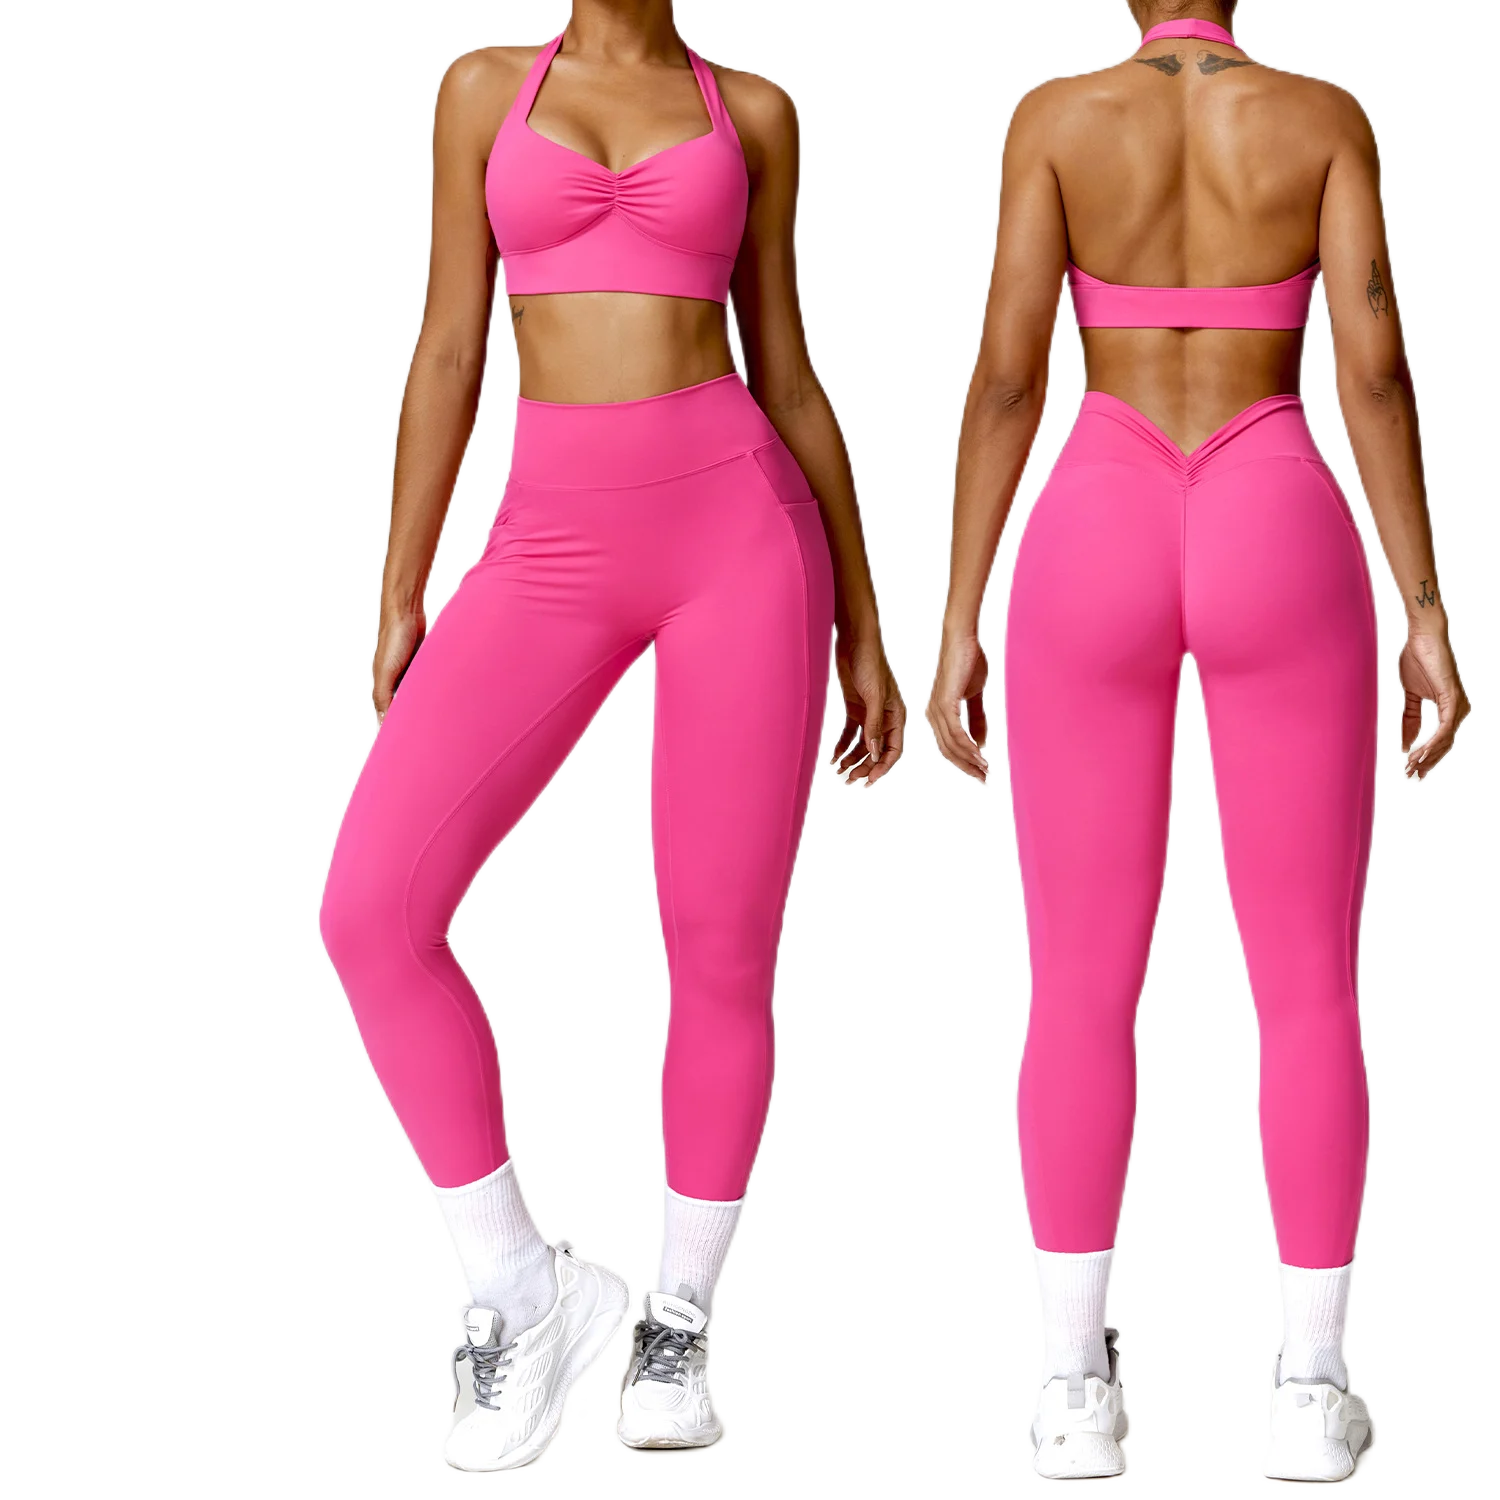 Mermaid Curve Tight Yoga Set Matte Quick Drying Women's Fitness Clothing Push up sports bra+Gym legs 2-piece suit